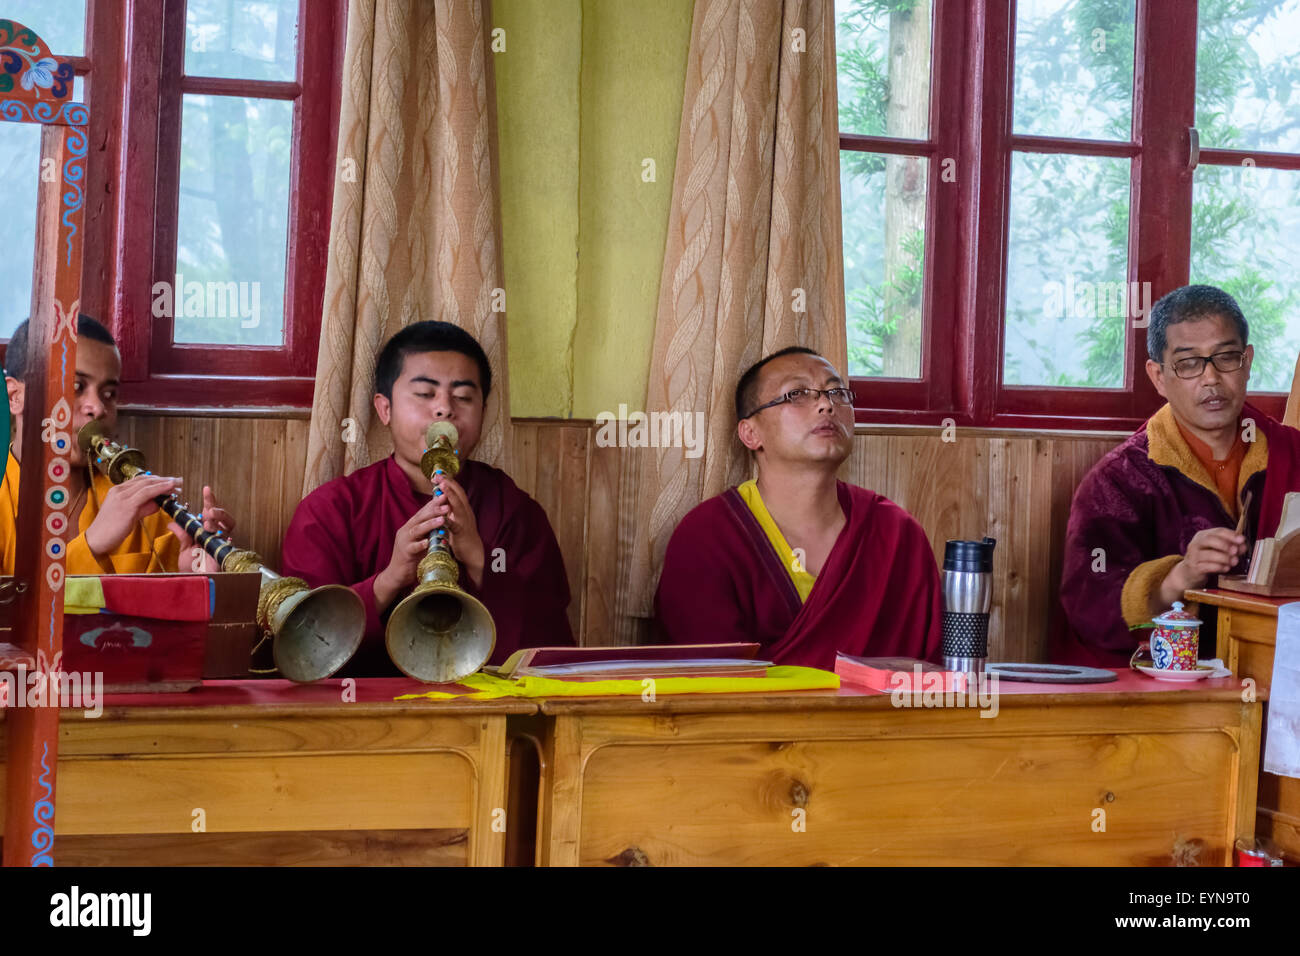 Four Buddhist priests, Lamas, praying inside a monastery in India, playing traditional flute, gong with copy space Stock Photo